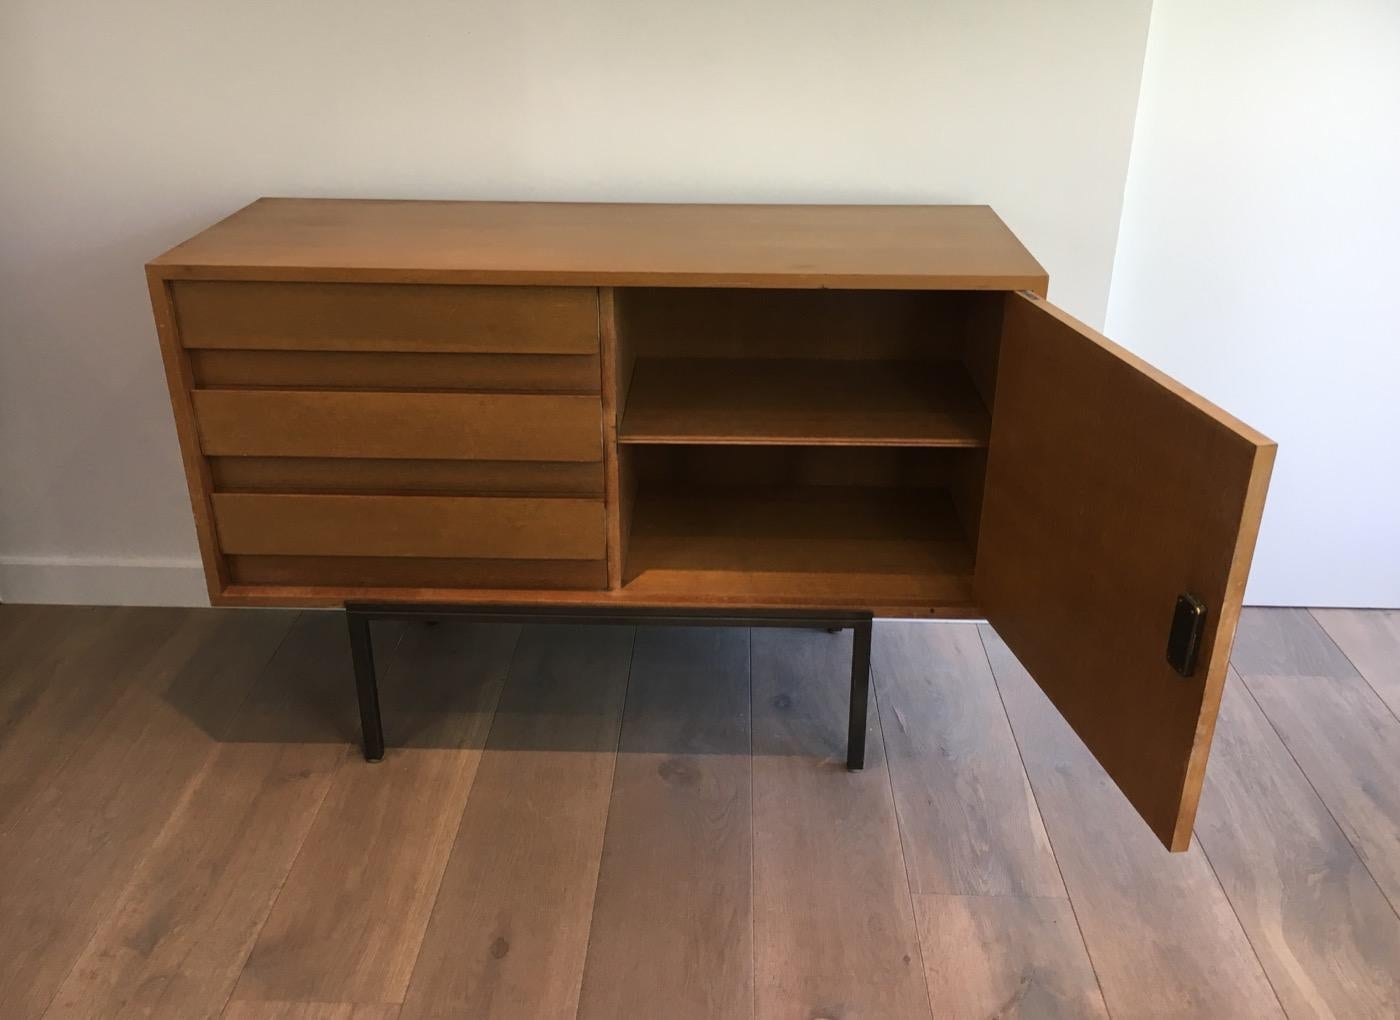 French Sideboard with One Door and 3 Drawers on a Modernist Steel Base